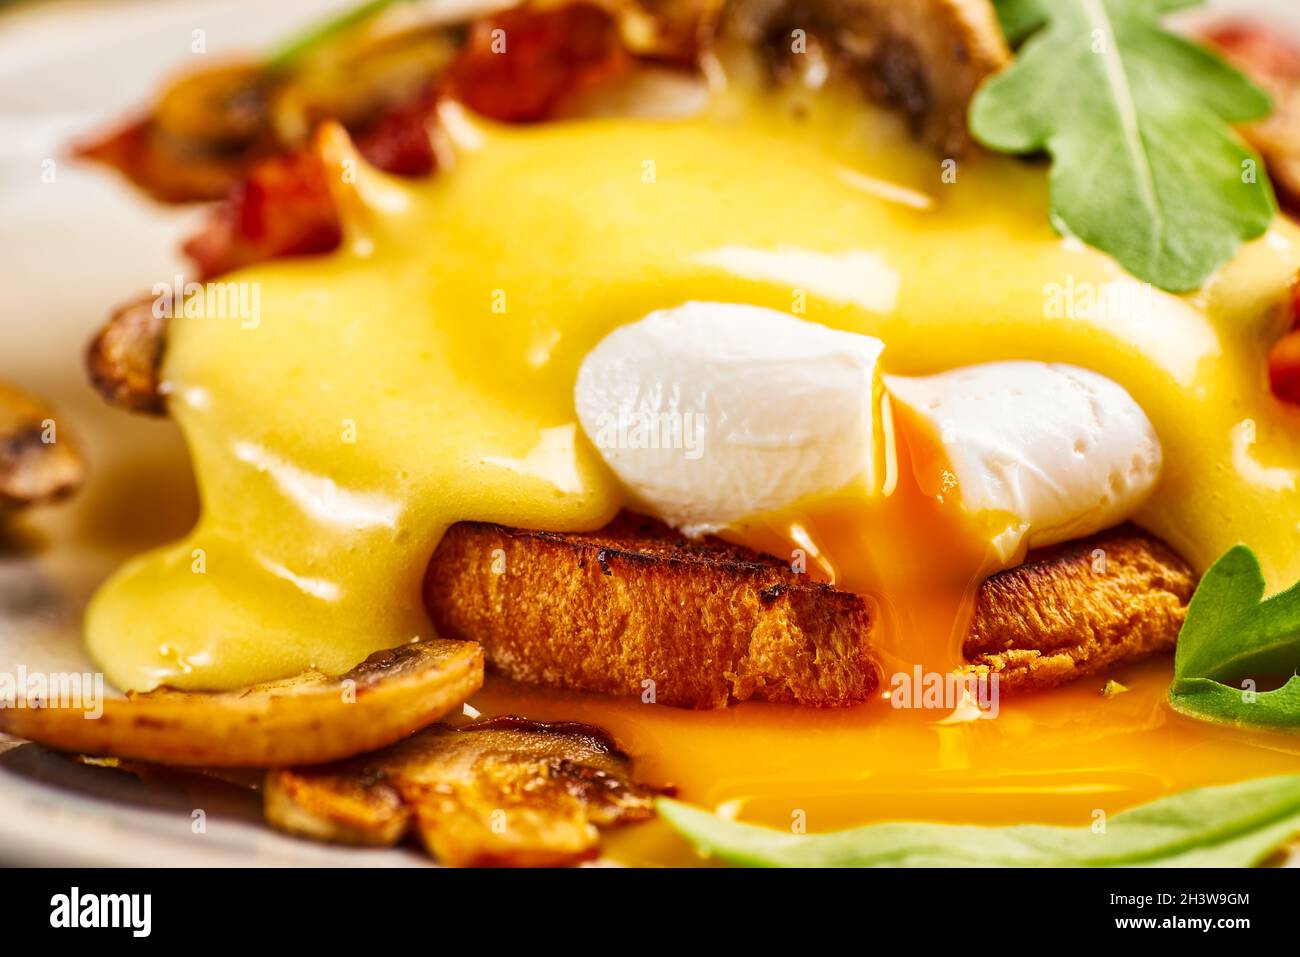 Close-up of eggs Benedict with hollandaise sauce and liquid yolk Stock Photo